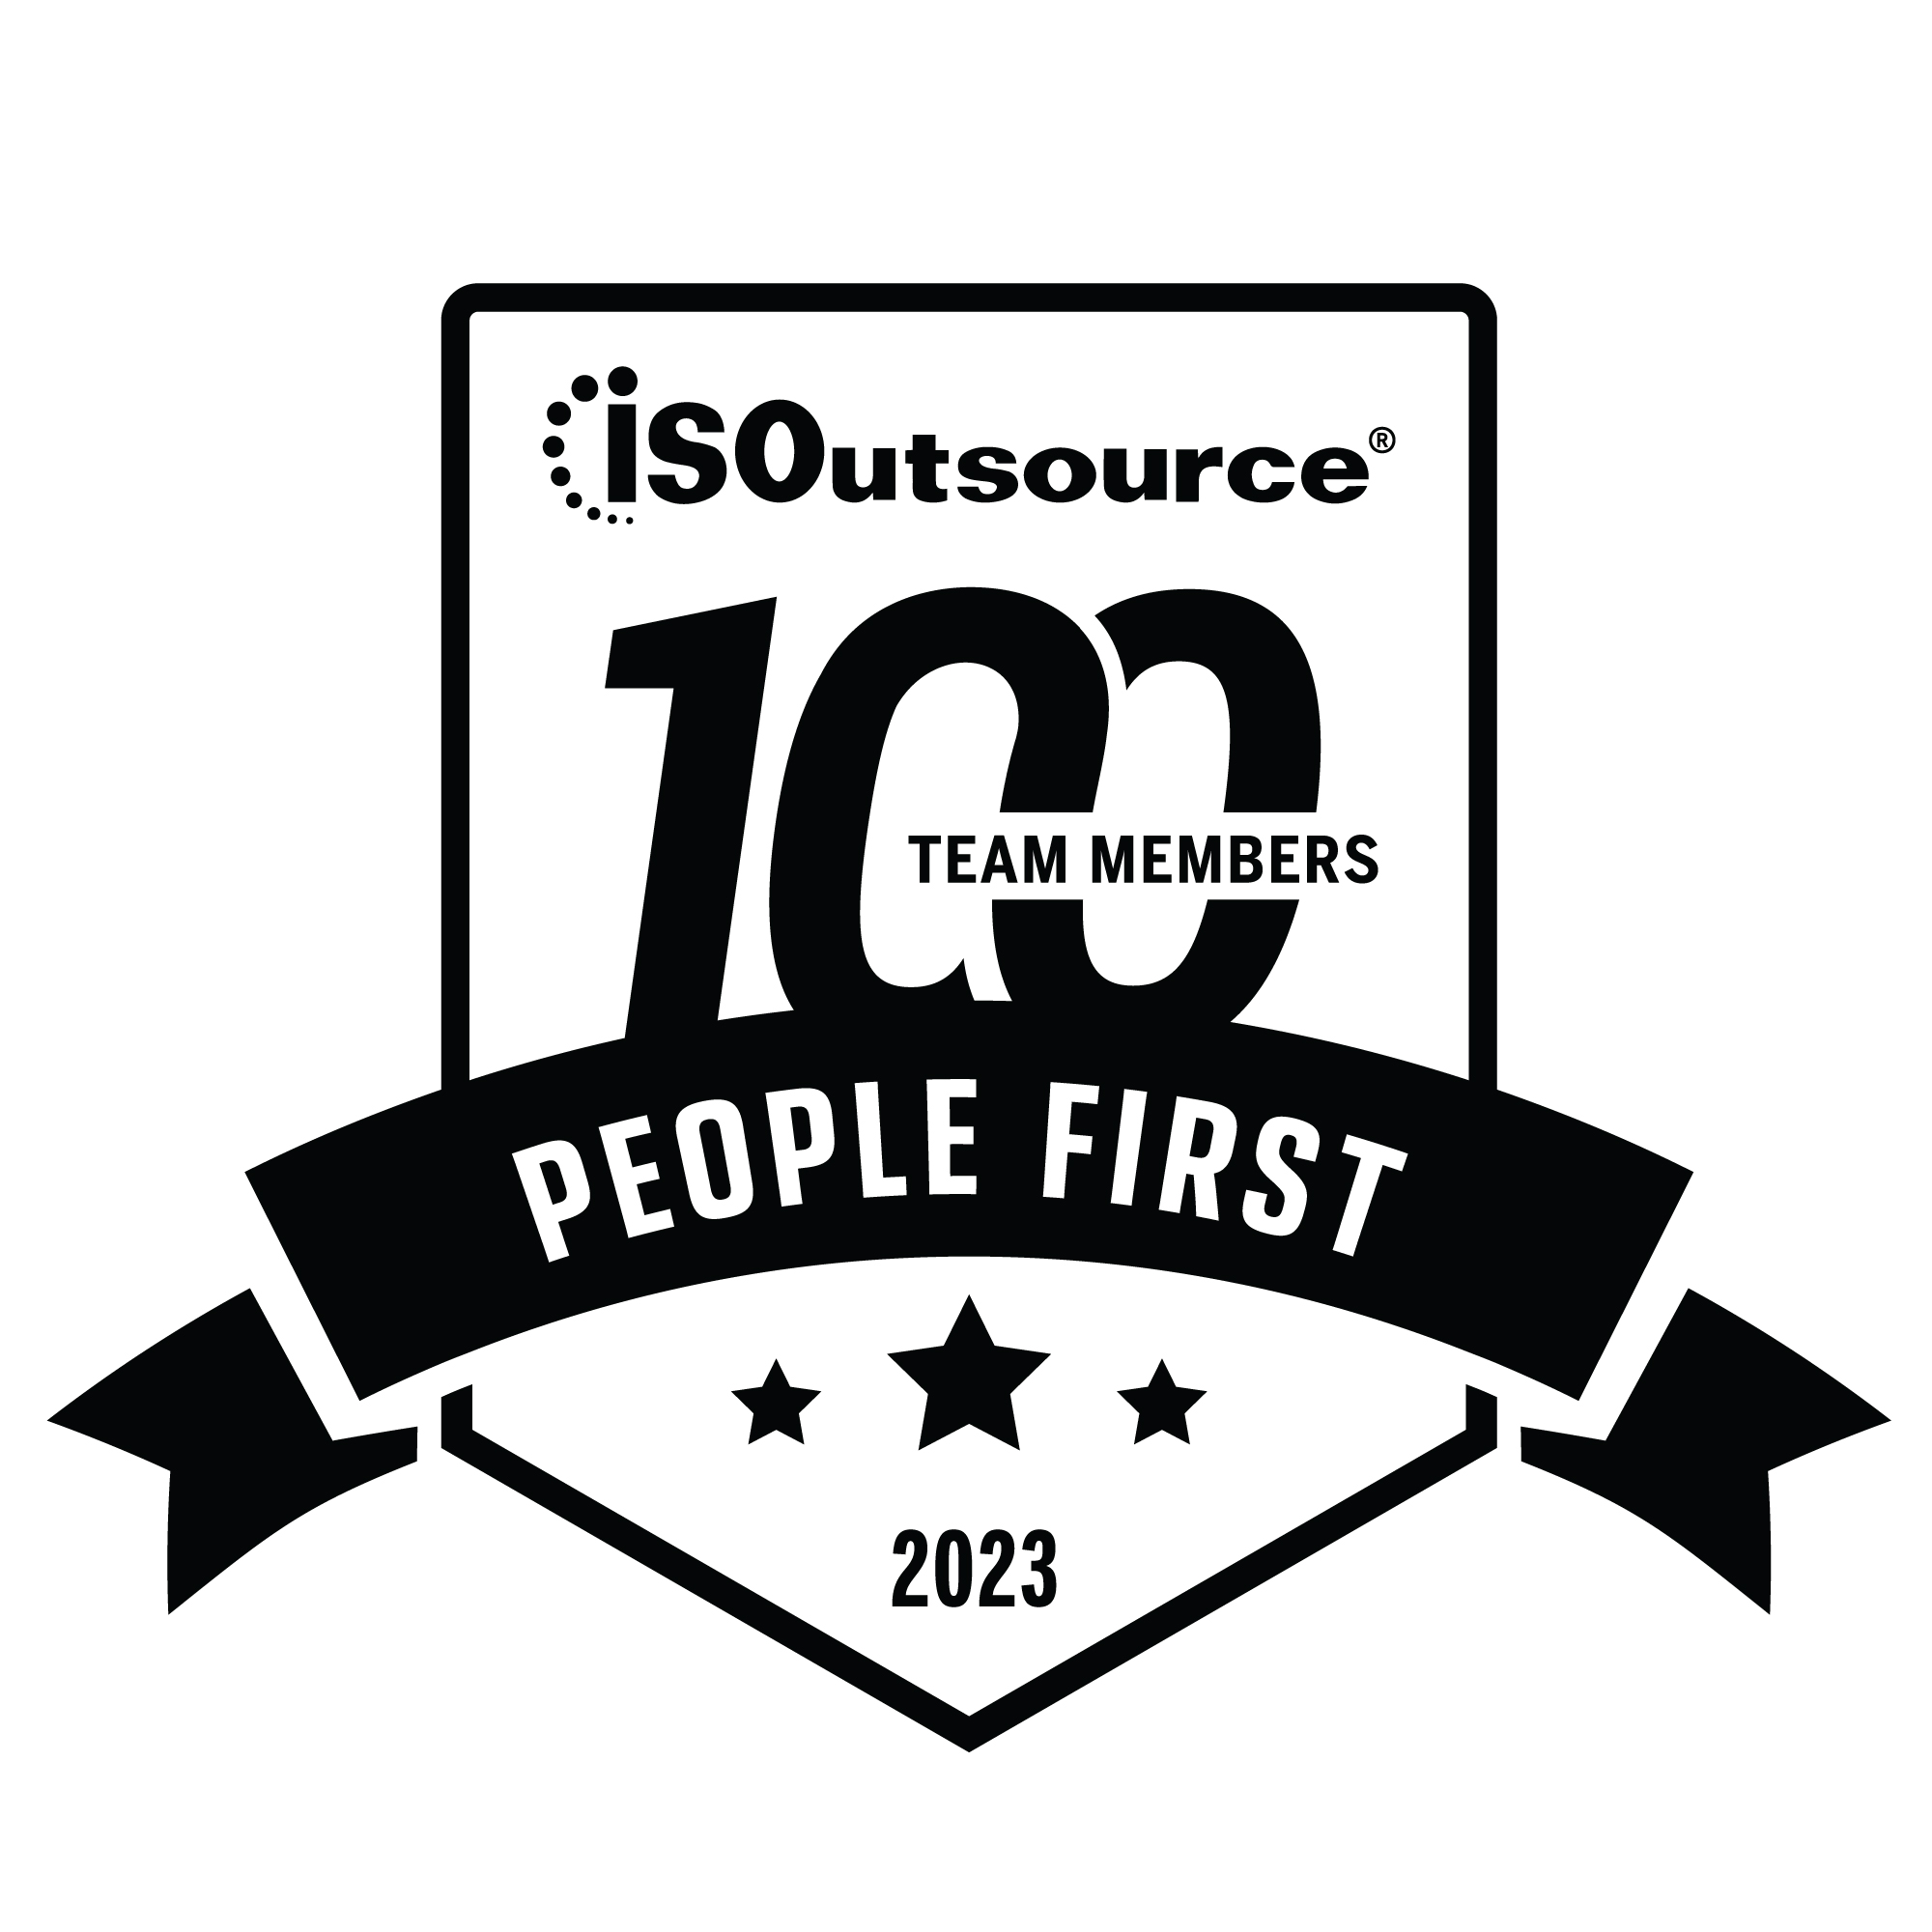 Video - Work for ISOutsource